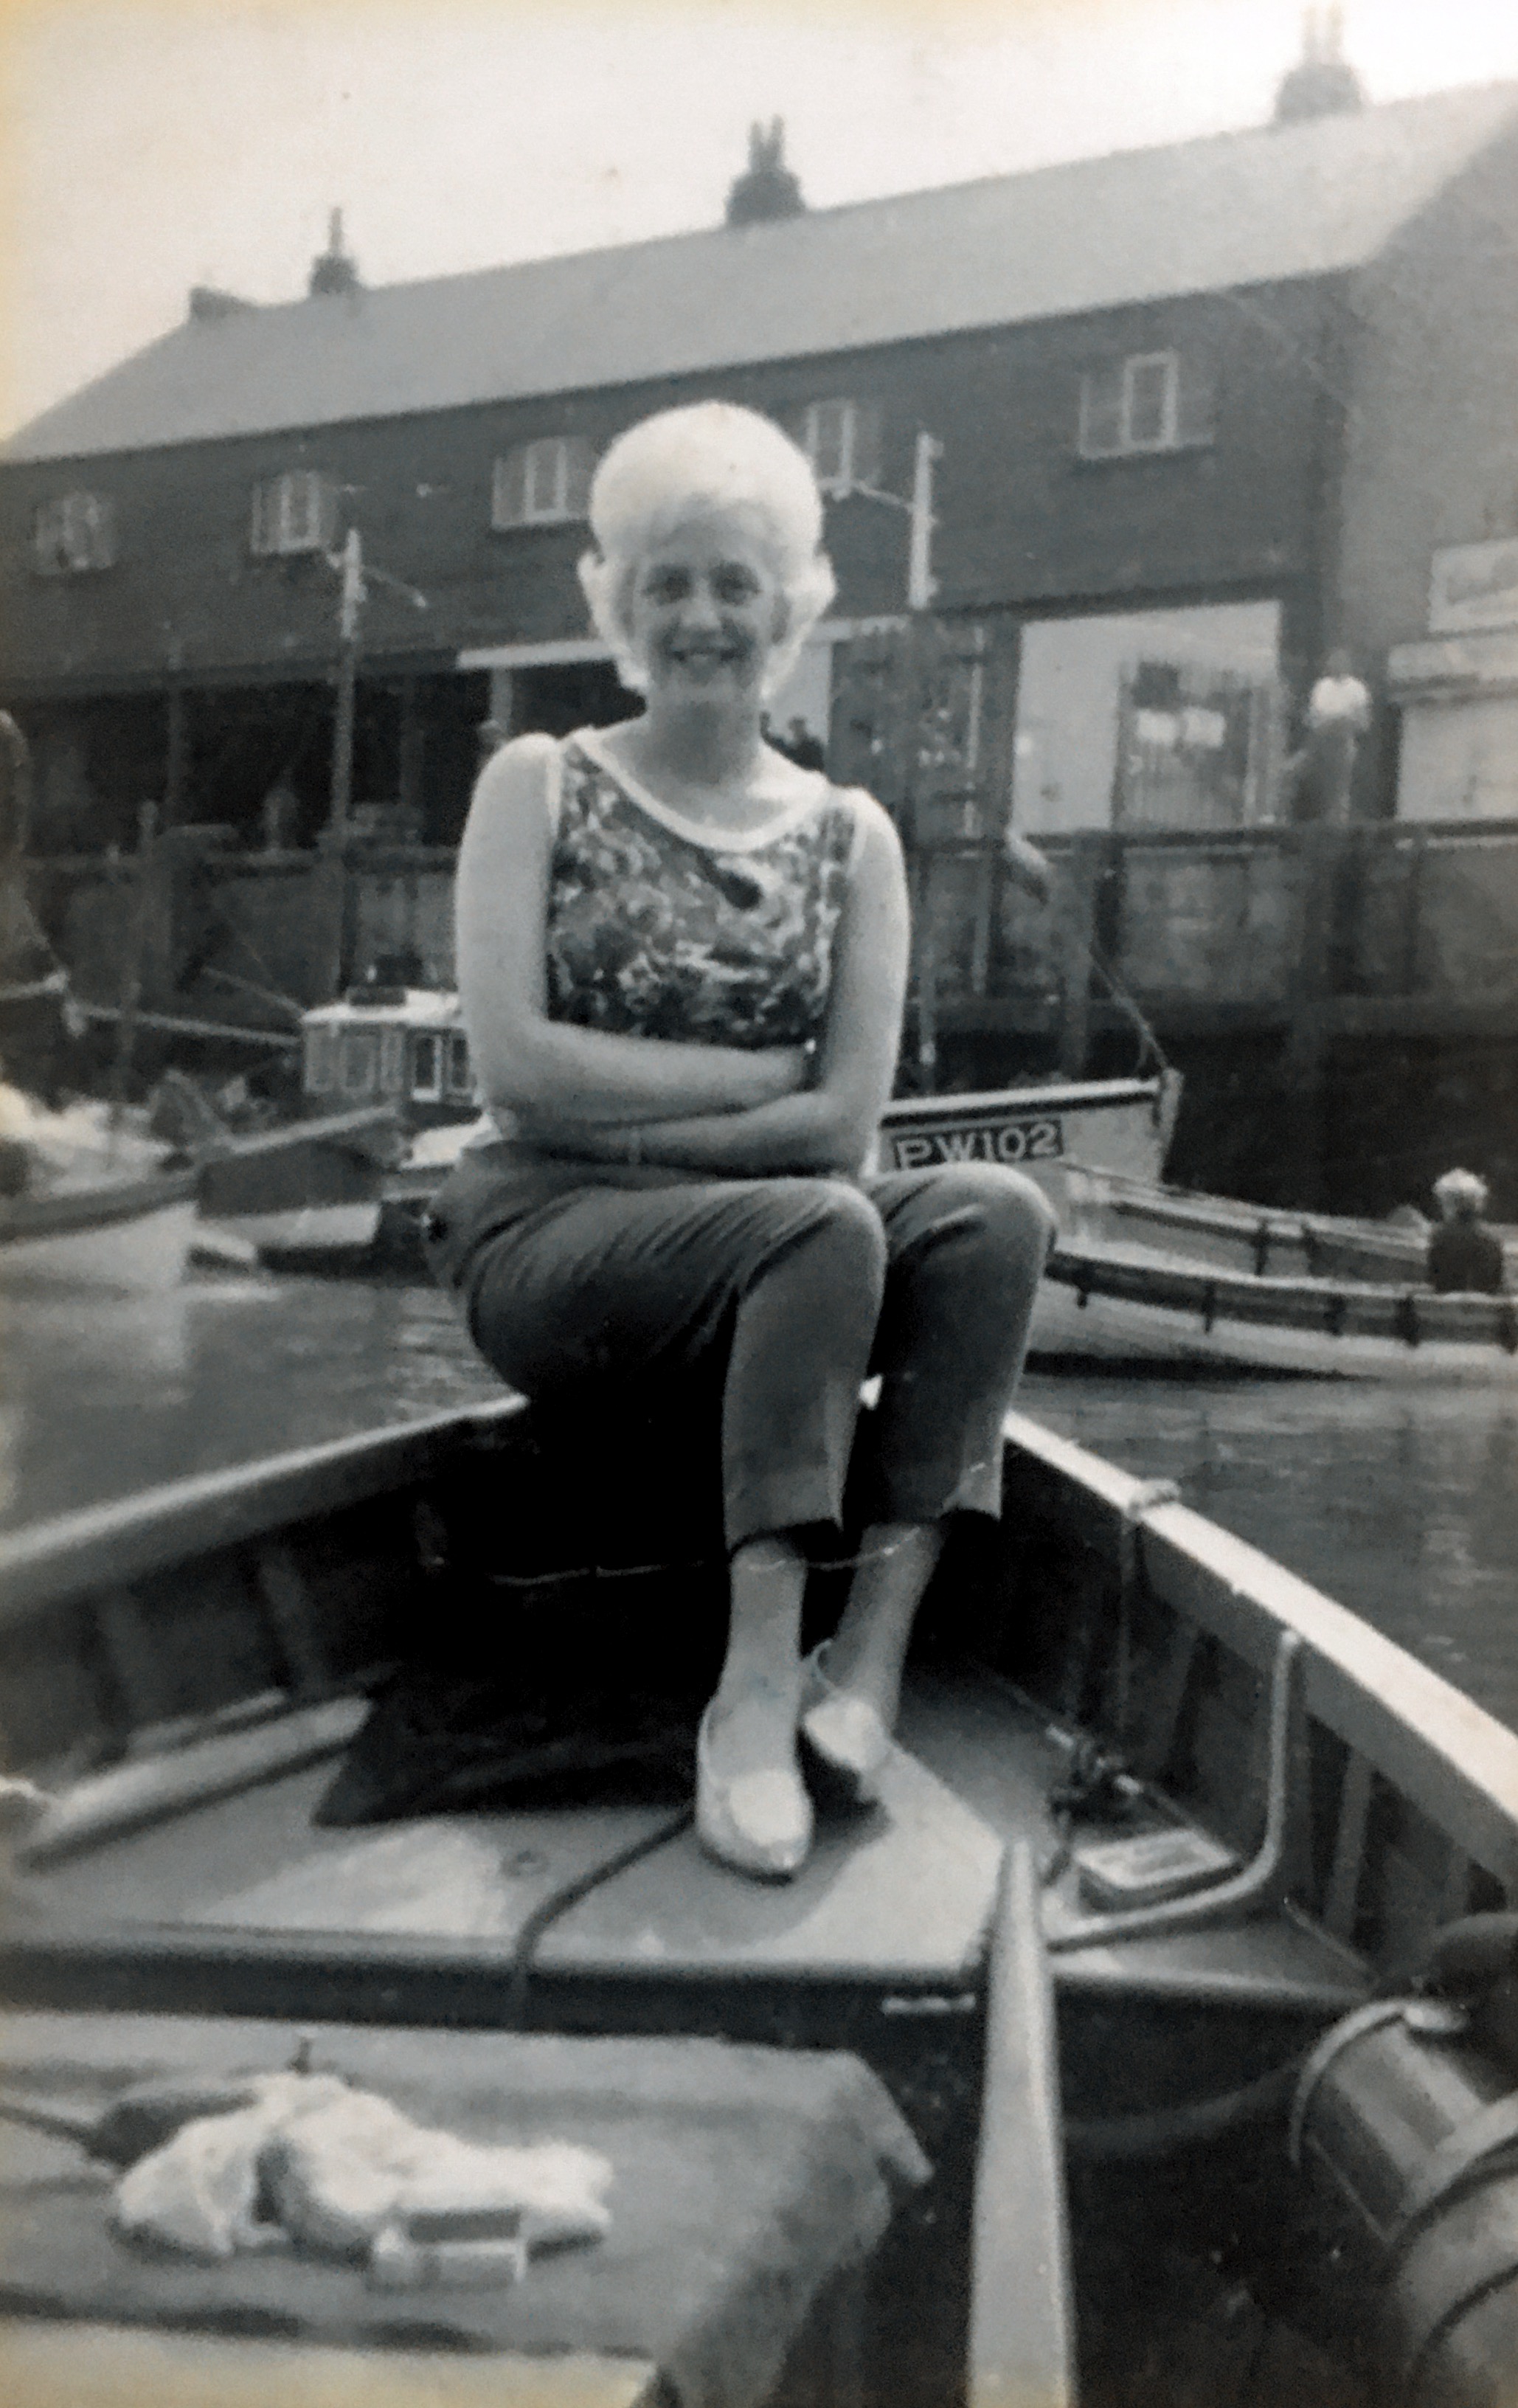 Nan Marie on a boat in Scarborough in 1957